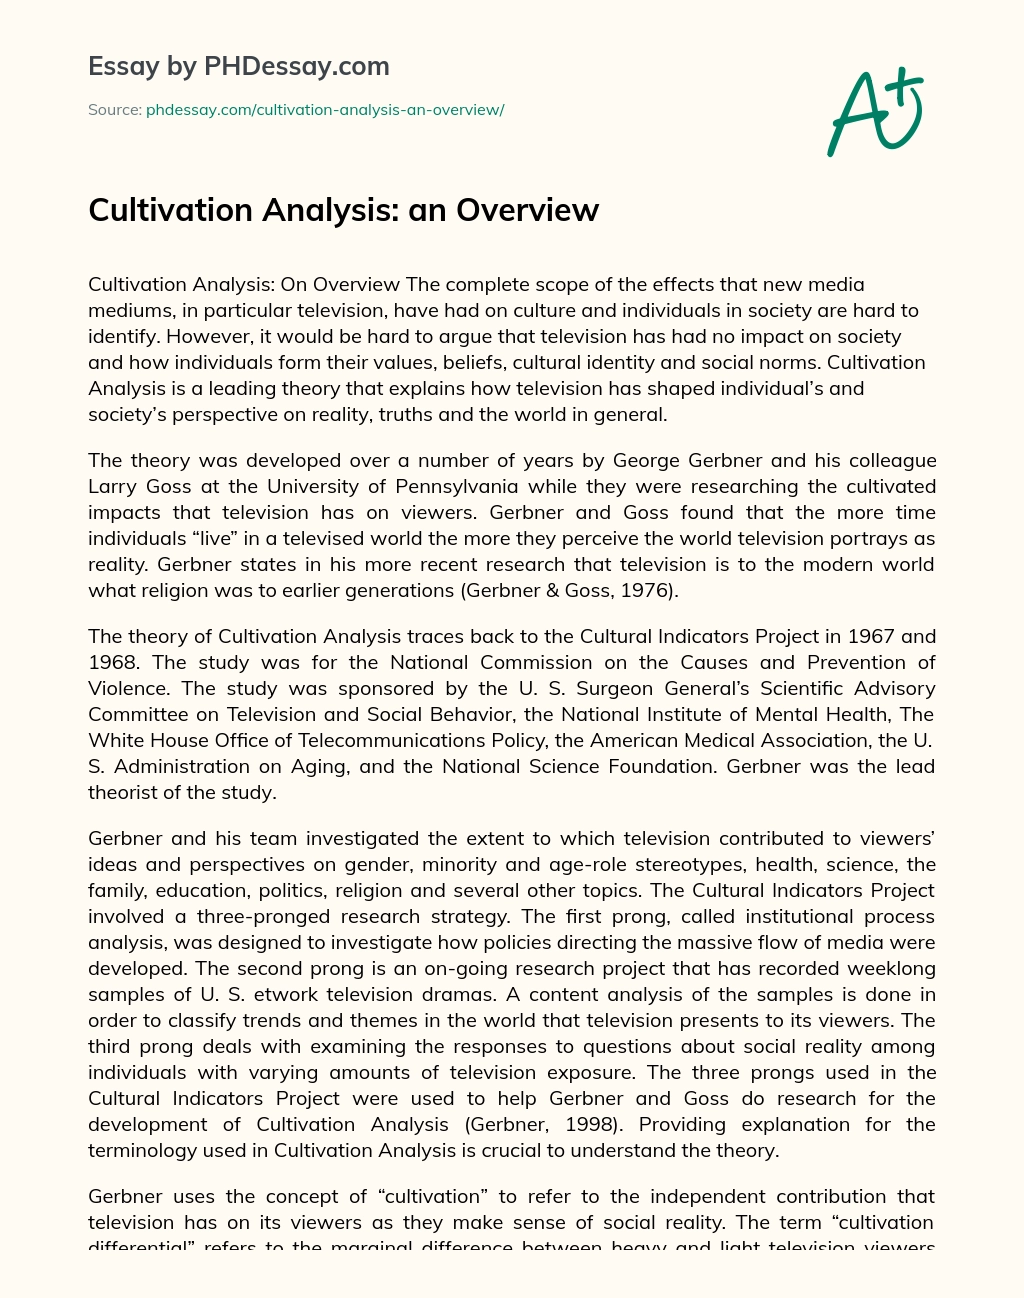 Cultivation Analysis: an Overview essay